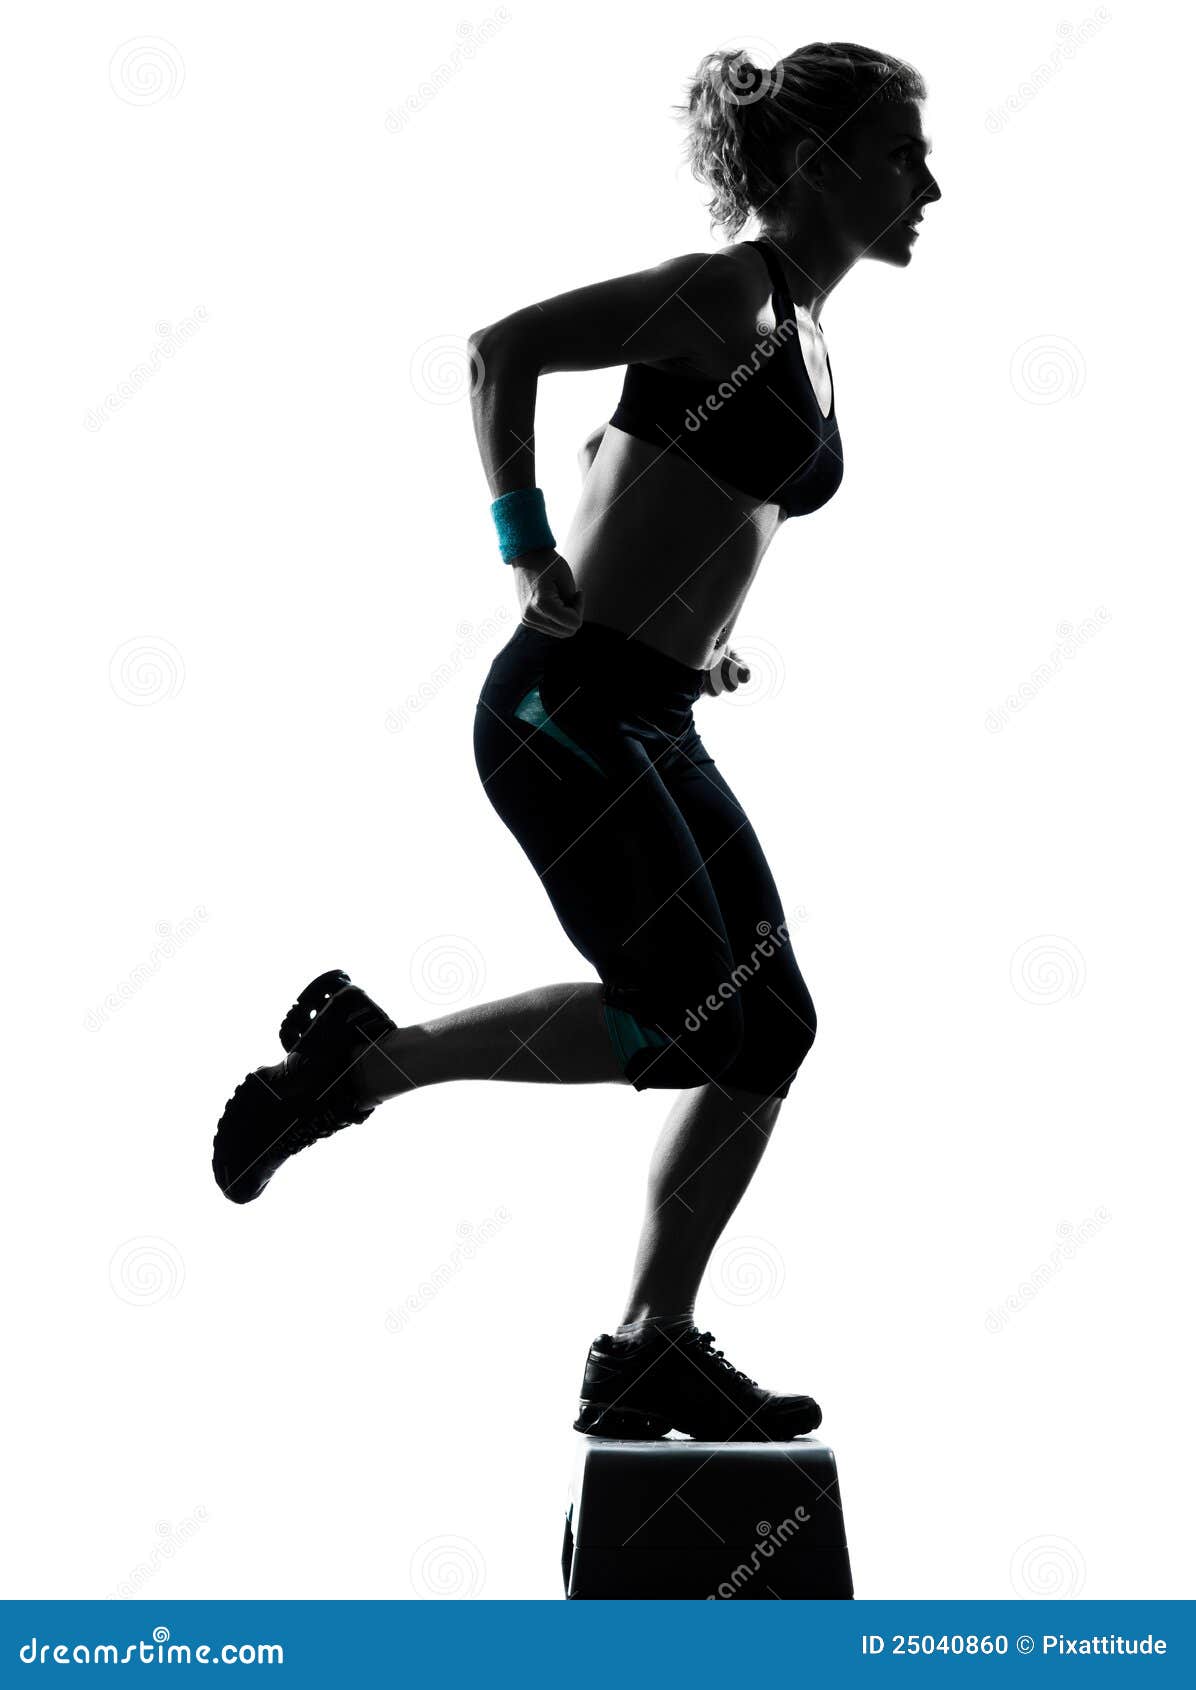 clipart step fitness - photo #5